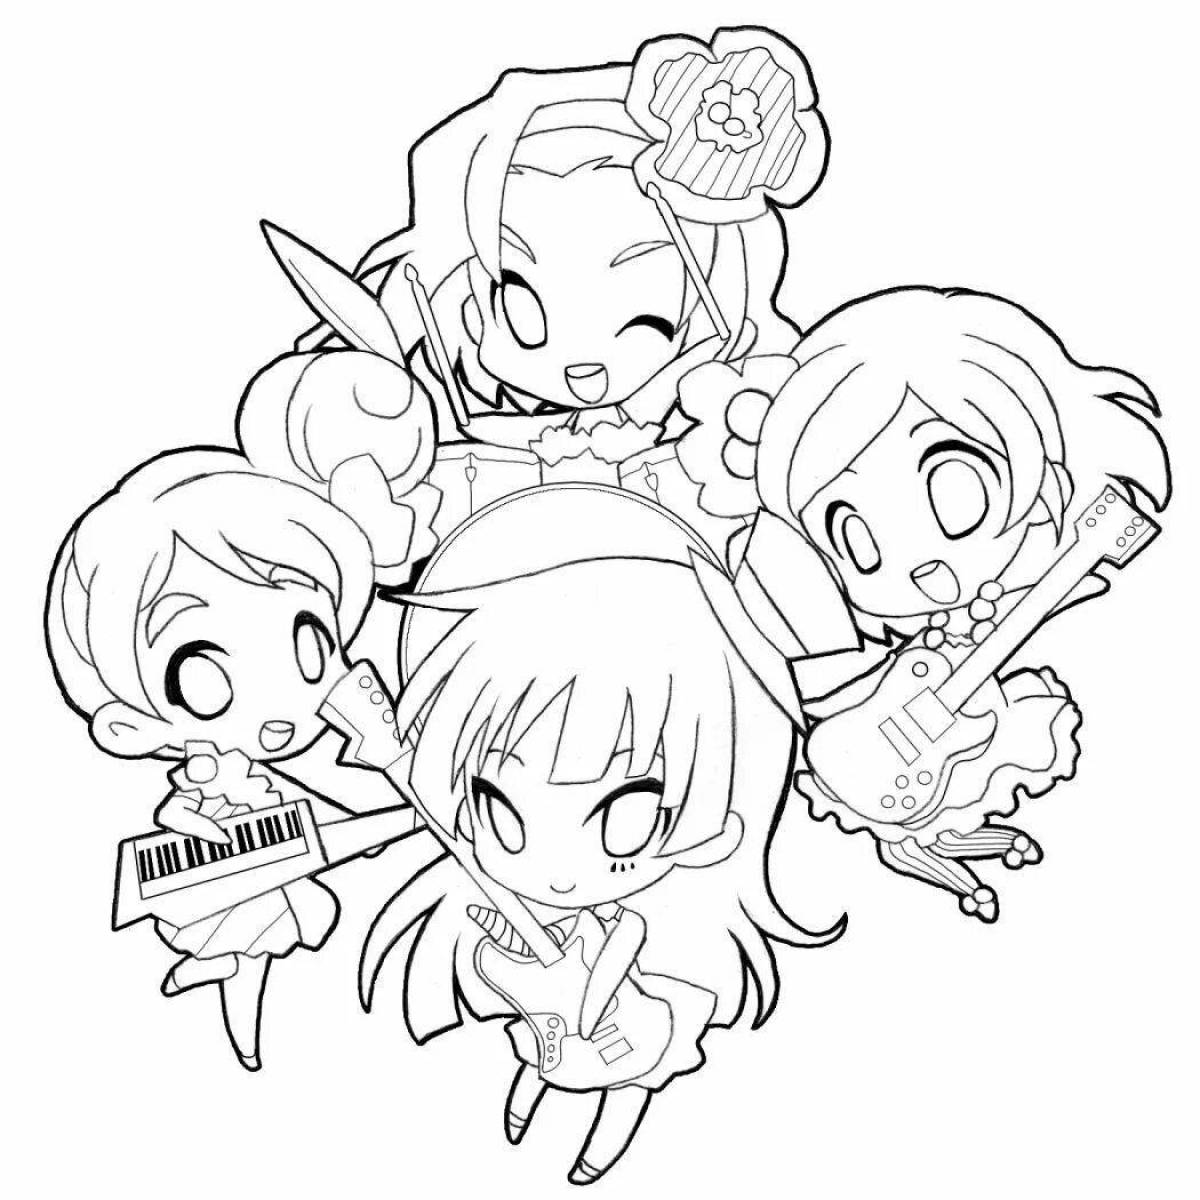 Coloring lively chibi anime volleyball